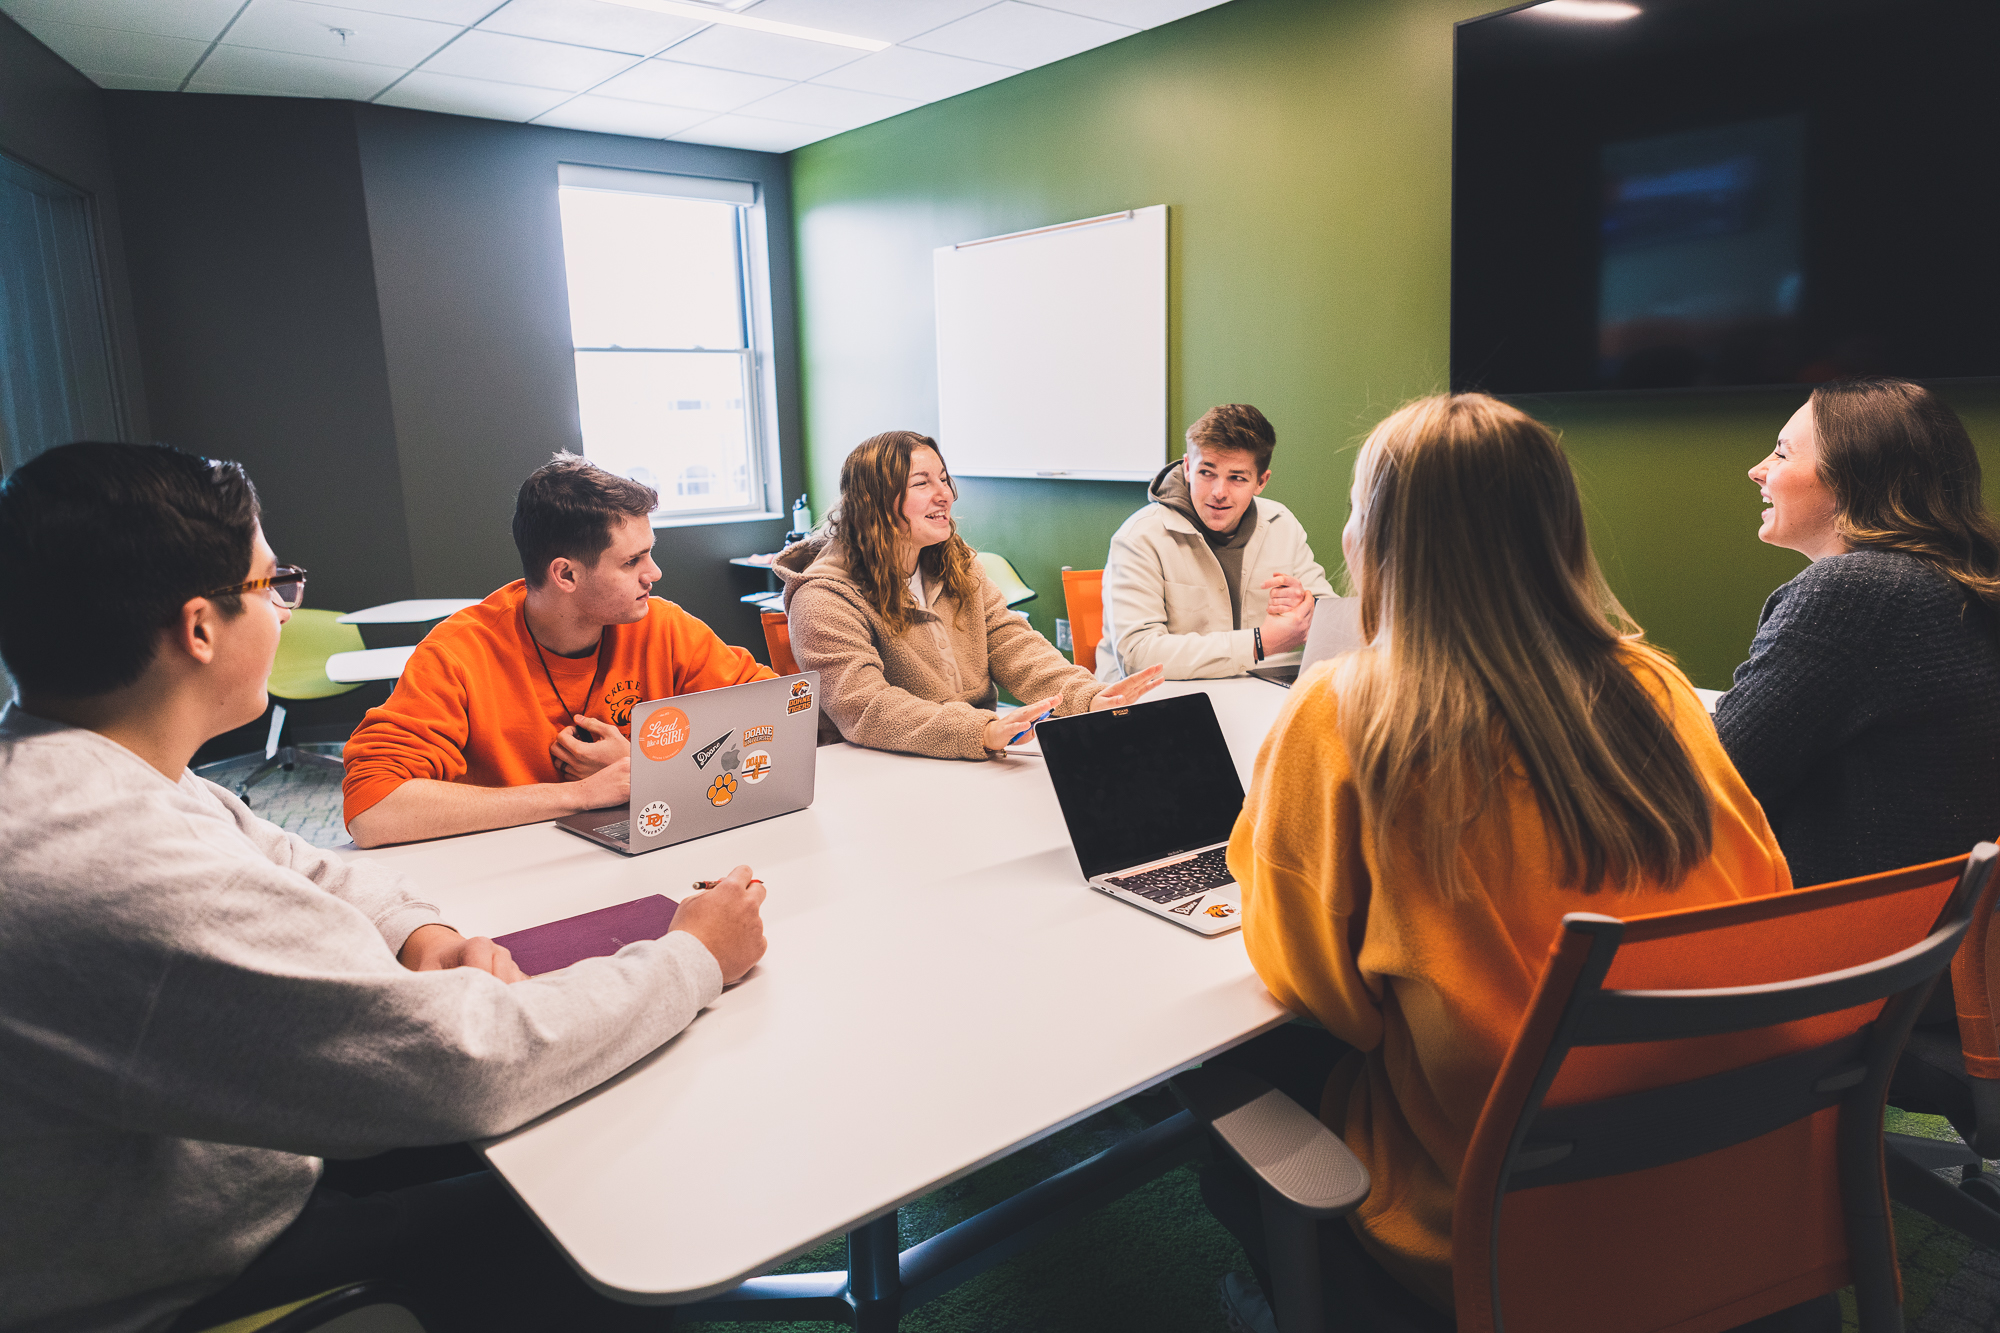 Six students sit around a white, rectangular table in a vibrant green-painted study room. Behind them are individual desks and chairs, and a window. 